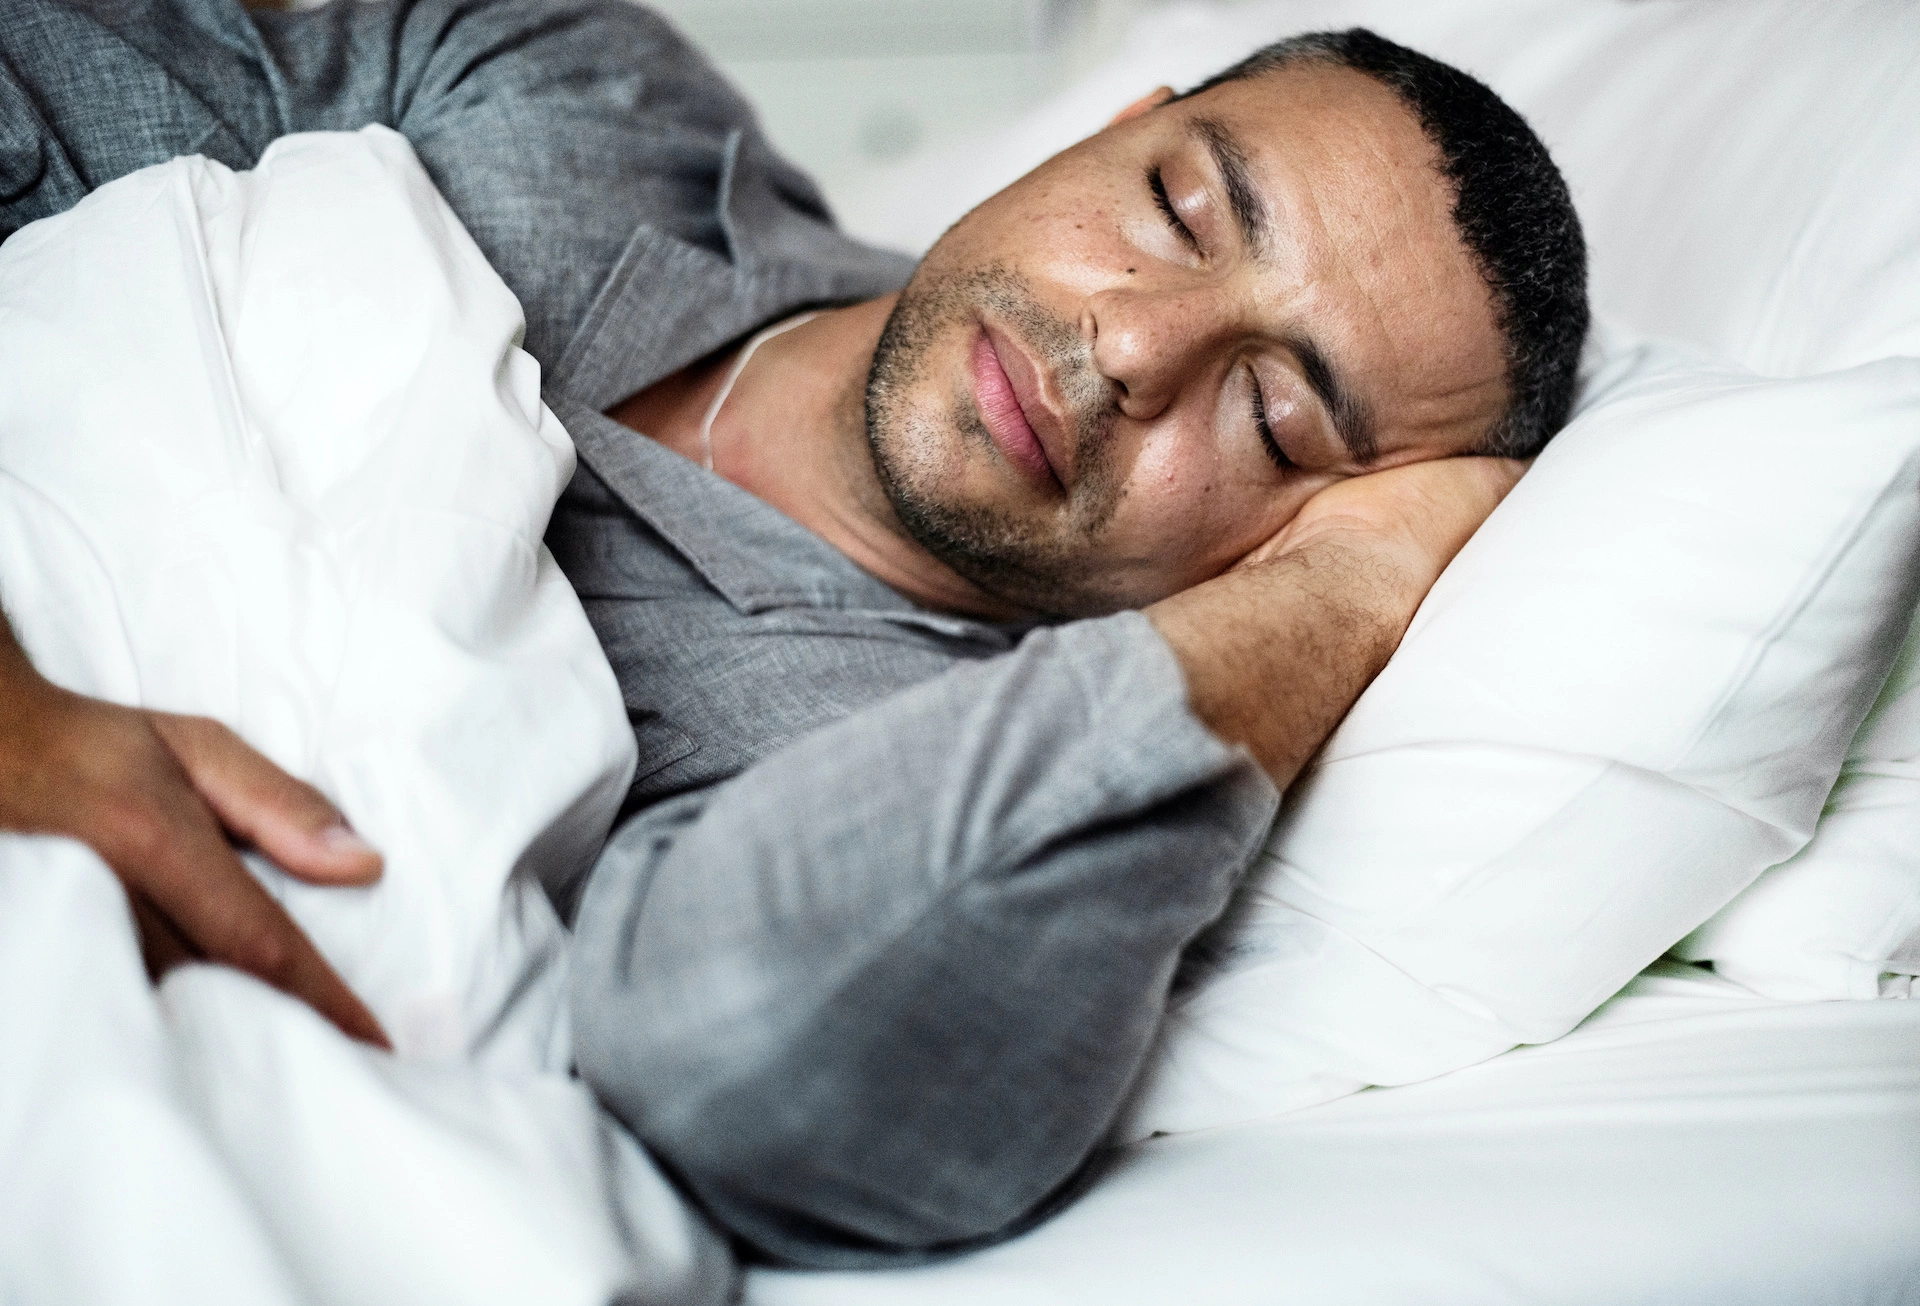 How not getting enough sleep could increase your stroke risk